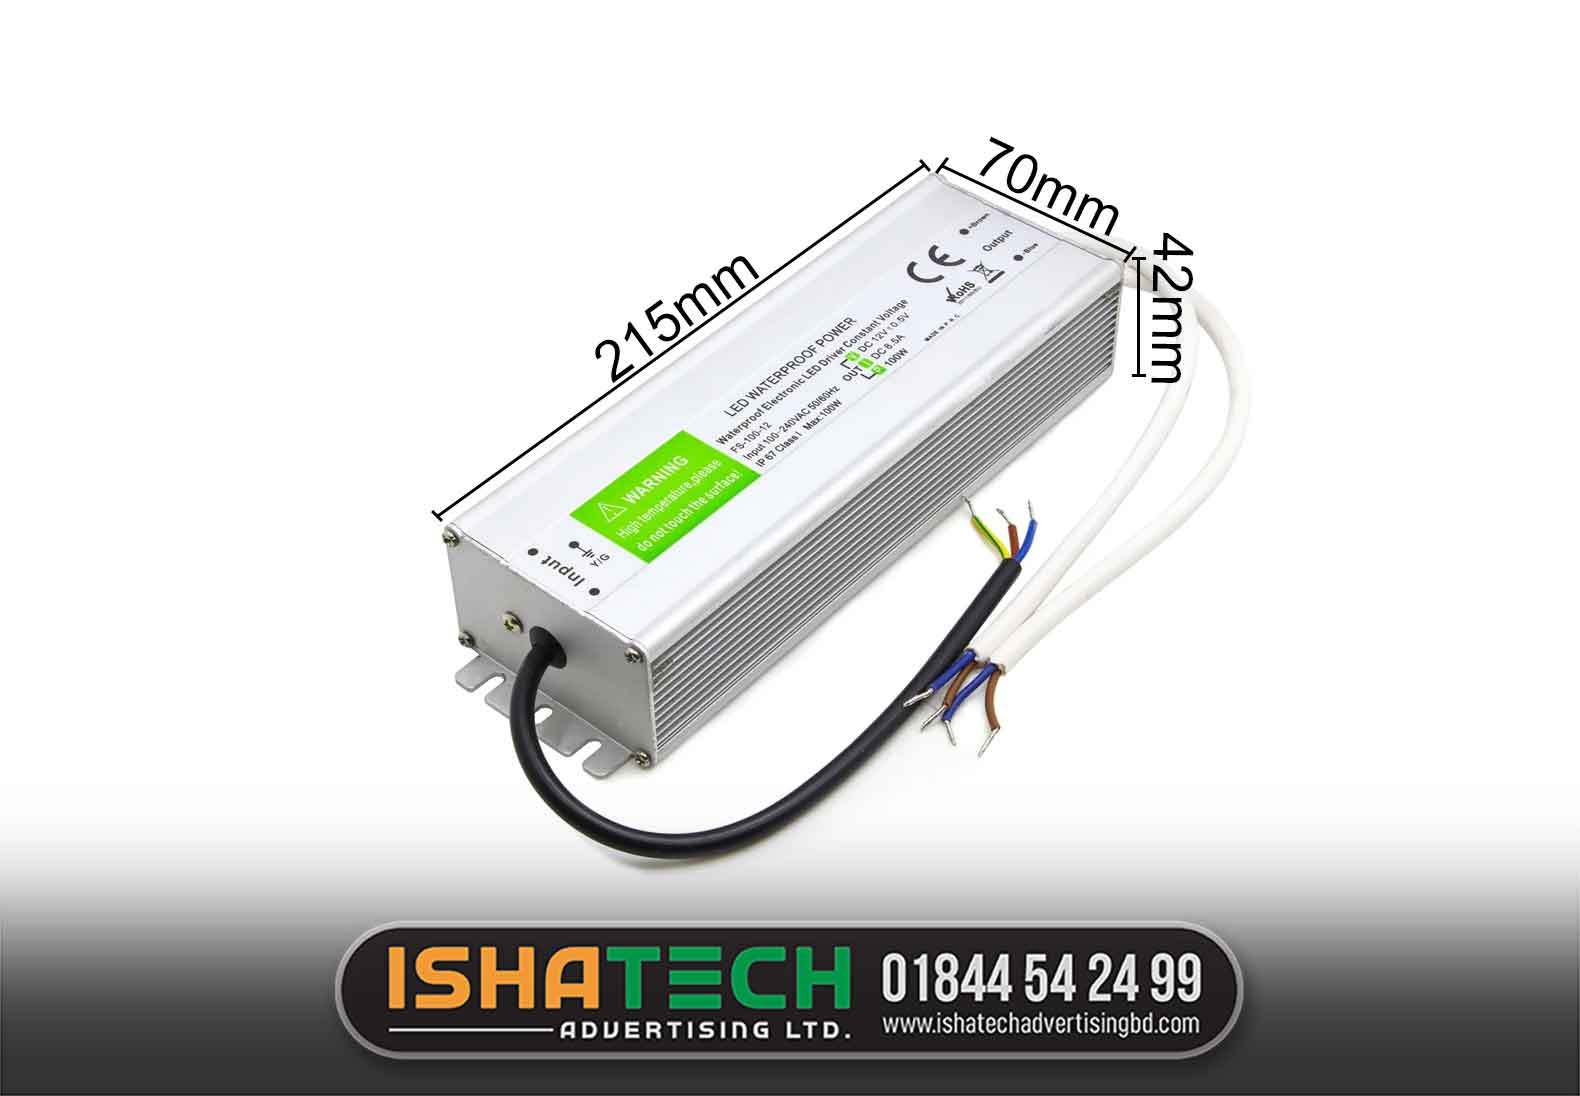 China Waterproof LED Power Supply, Power Supply Slim Waterproof 12V DC 36W IP67 85-264V, These Heavy Duty Outdoor Waterproof Power Supply Converters are used to power constant voltage outdoor LED Strip lights and Modules.